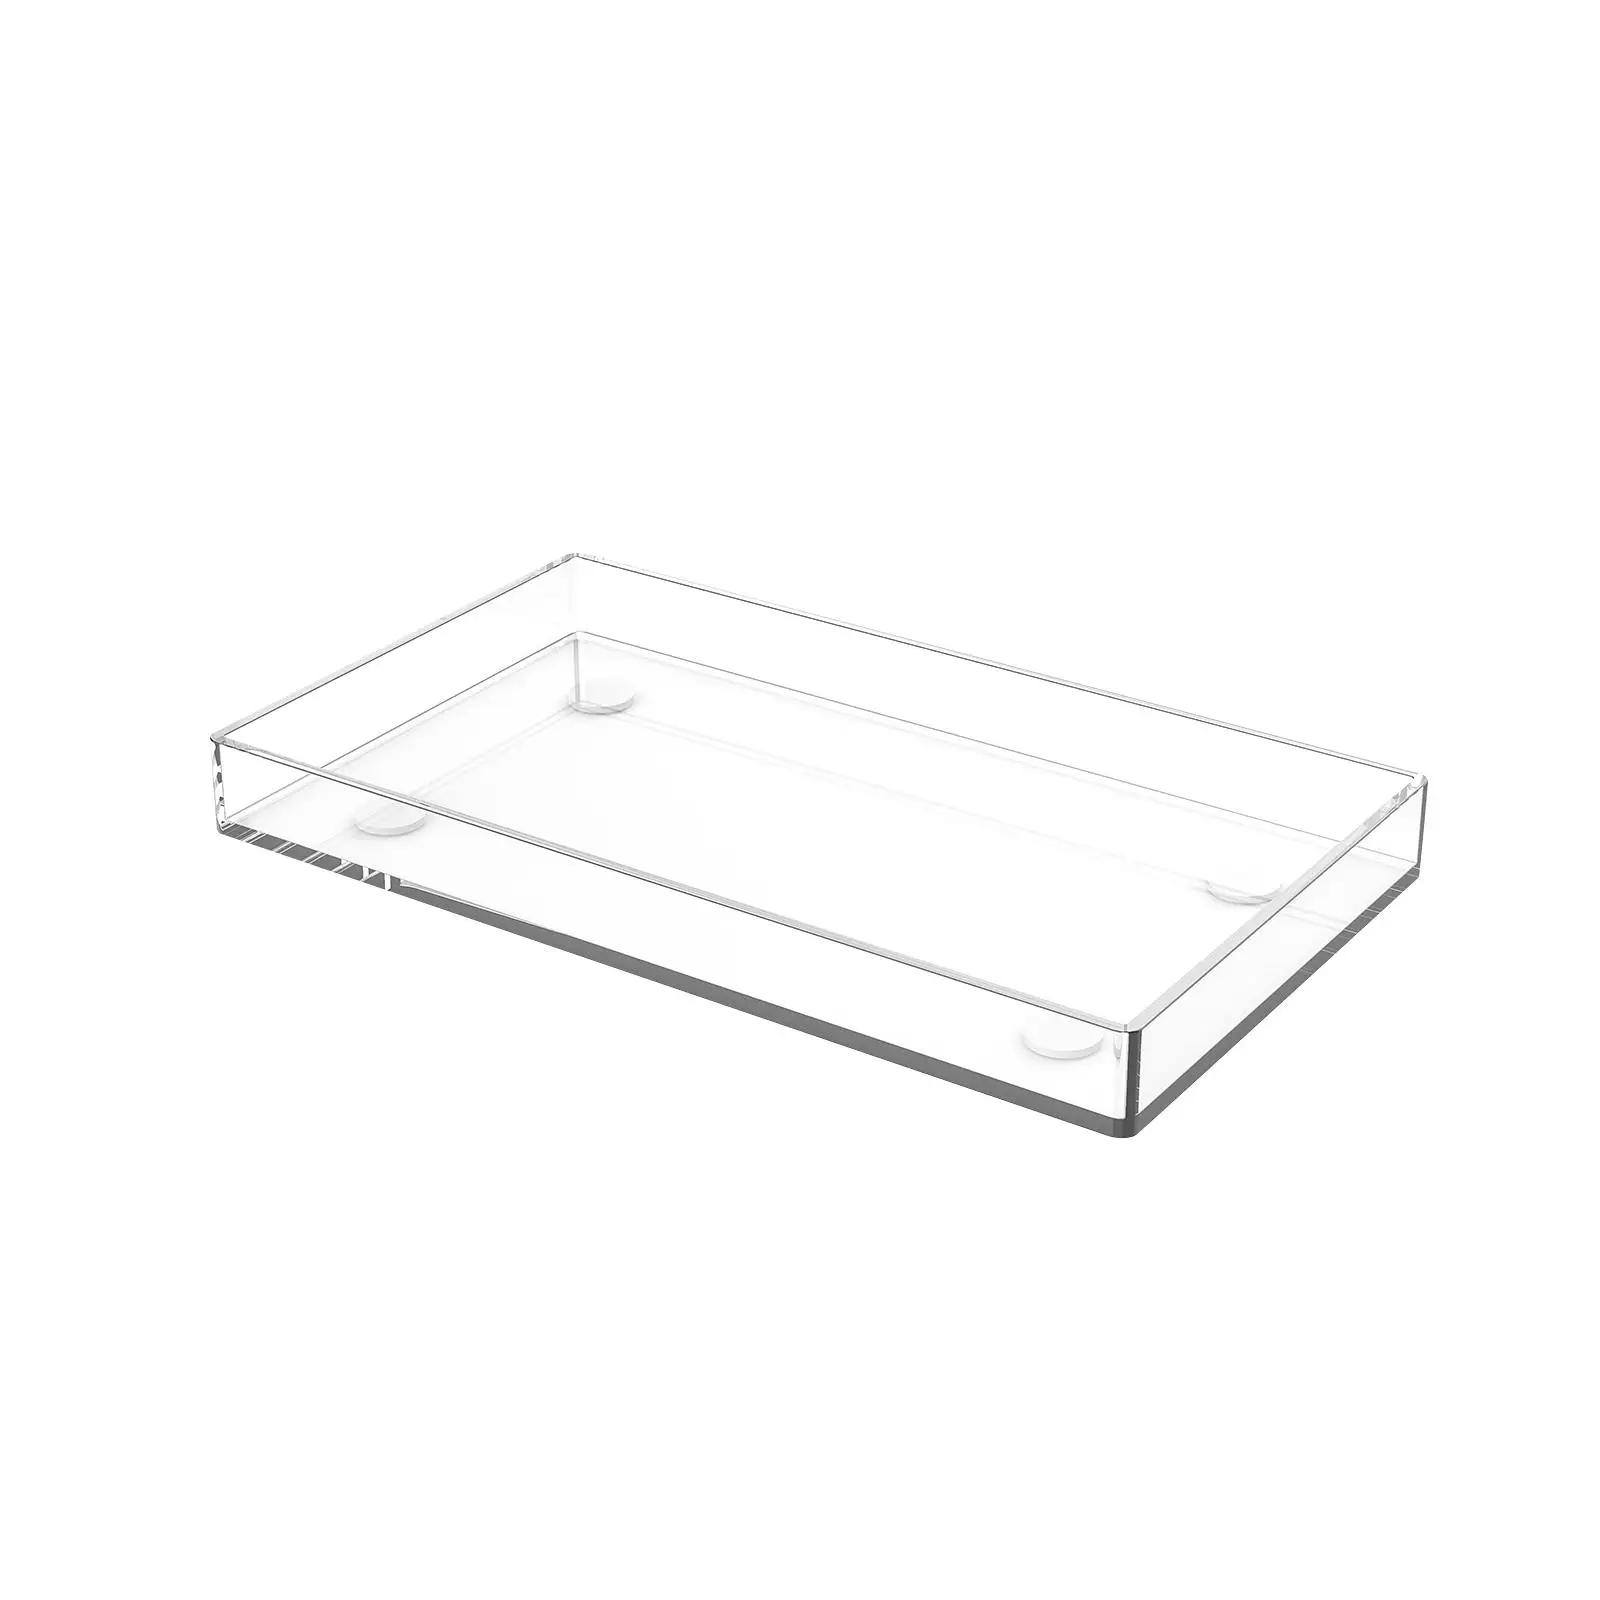 Clear Acrylic Tray Rectangular for Kitchen Tabletop Household Bedside Office